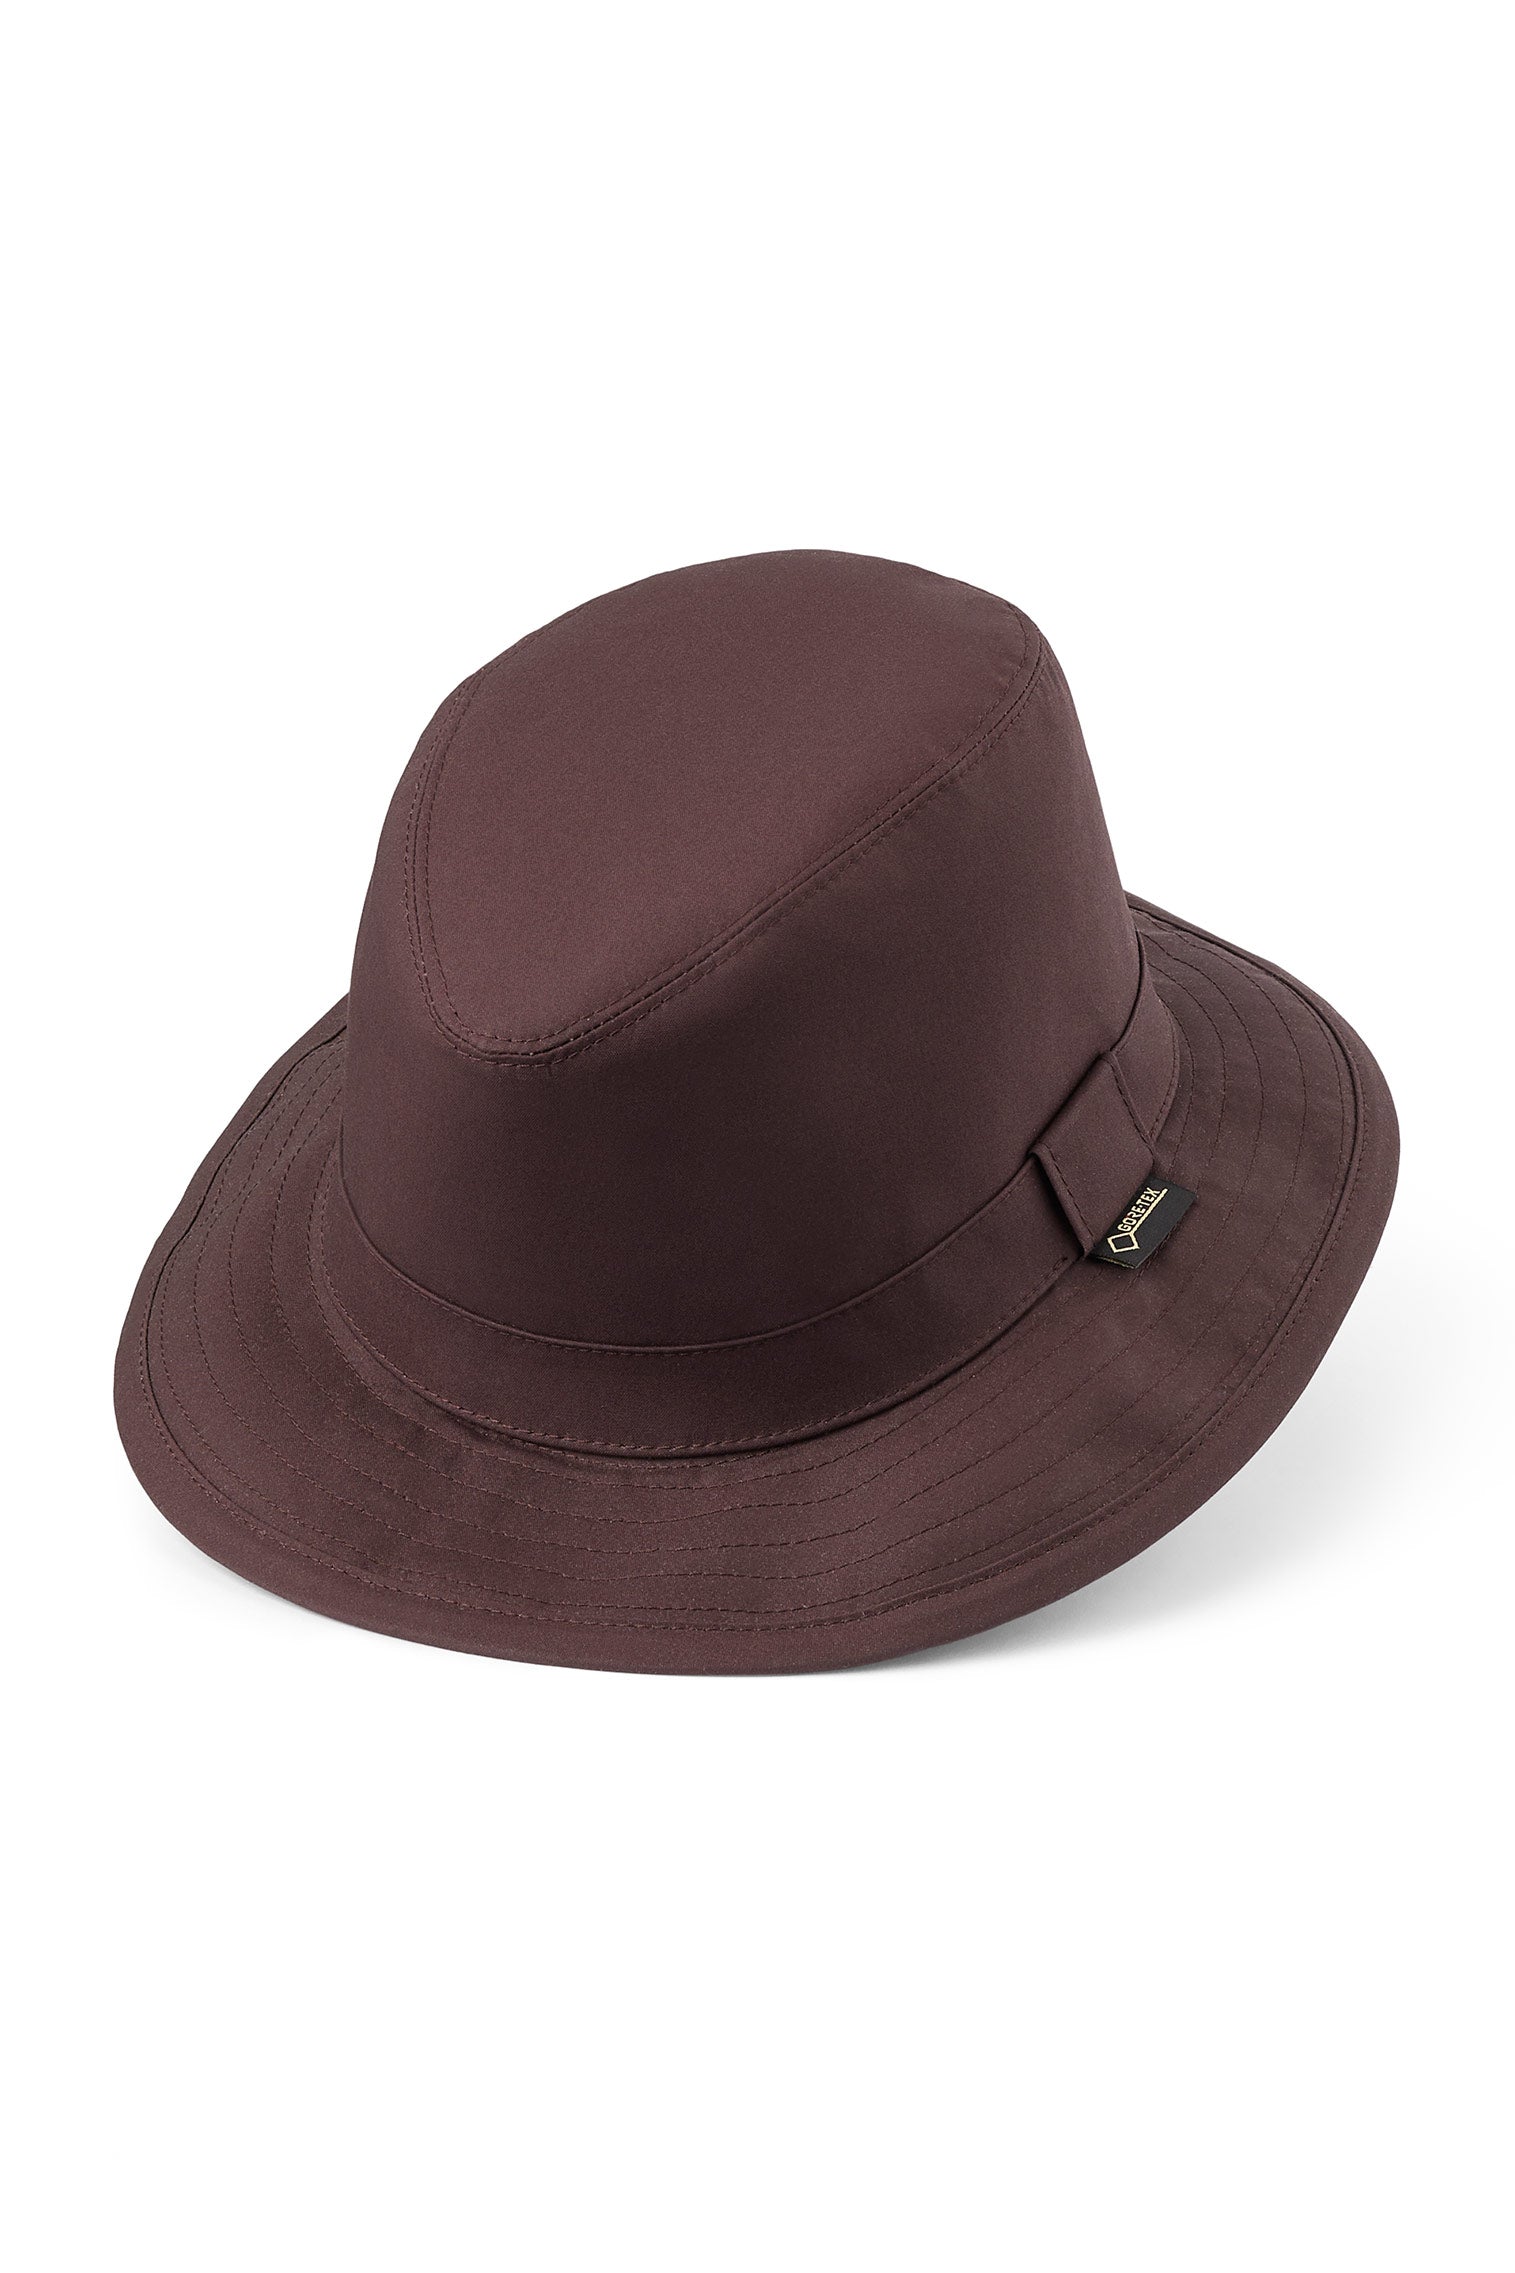 Tay GORE-TEX Hat - Hats for Round Face Shapes - Lock & Co. Hatters London UK